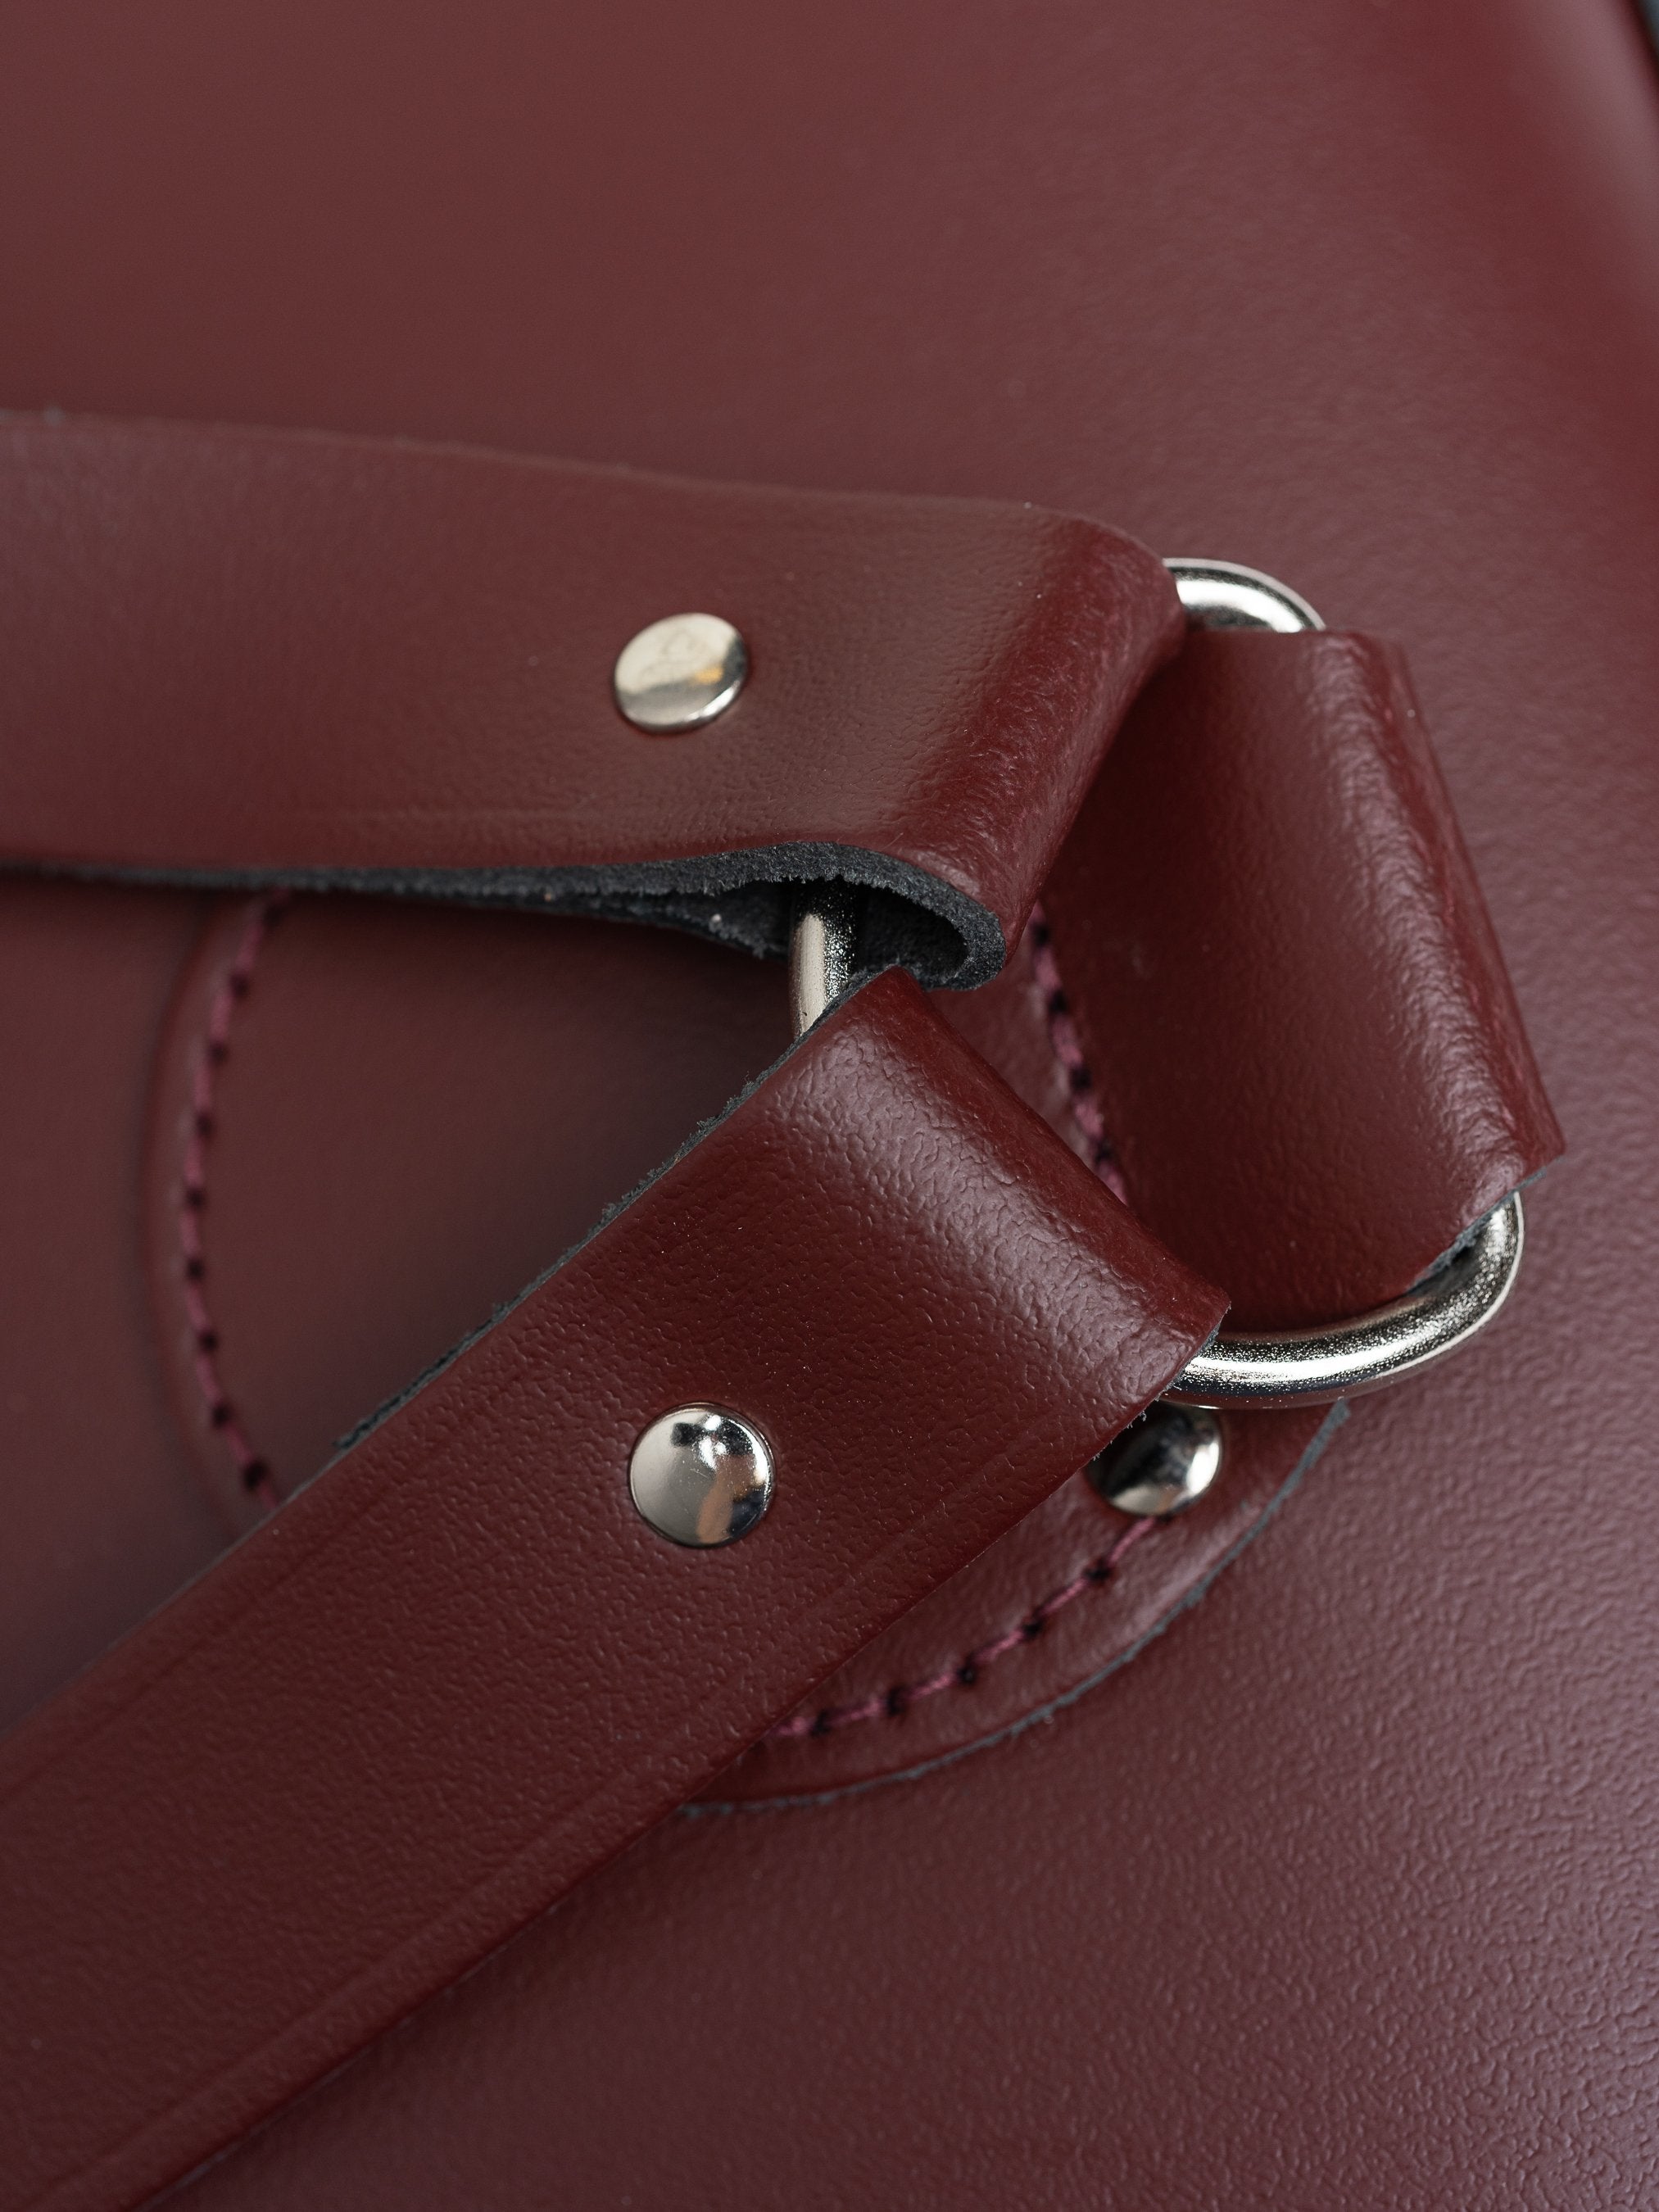 The Small Portrait Backpack -  Oxblood